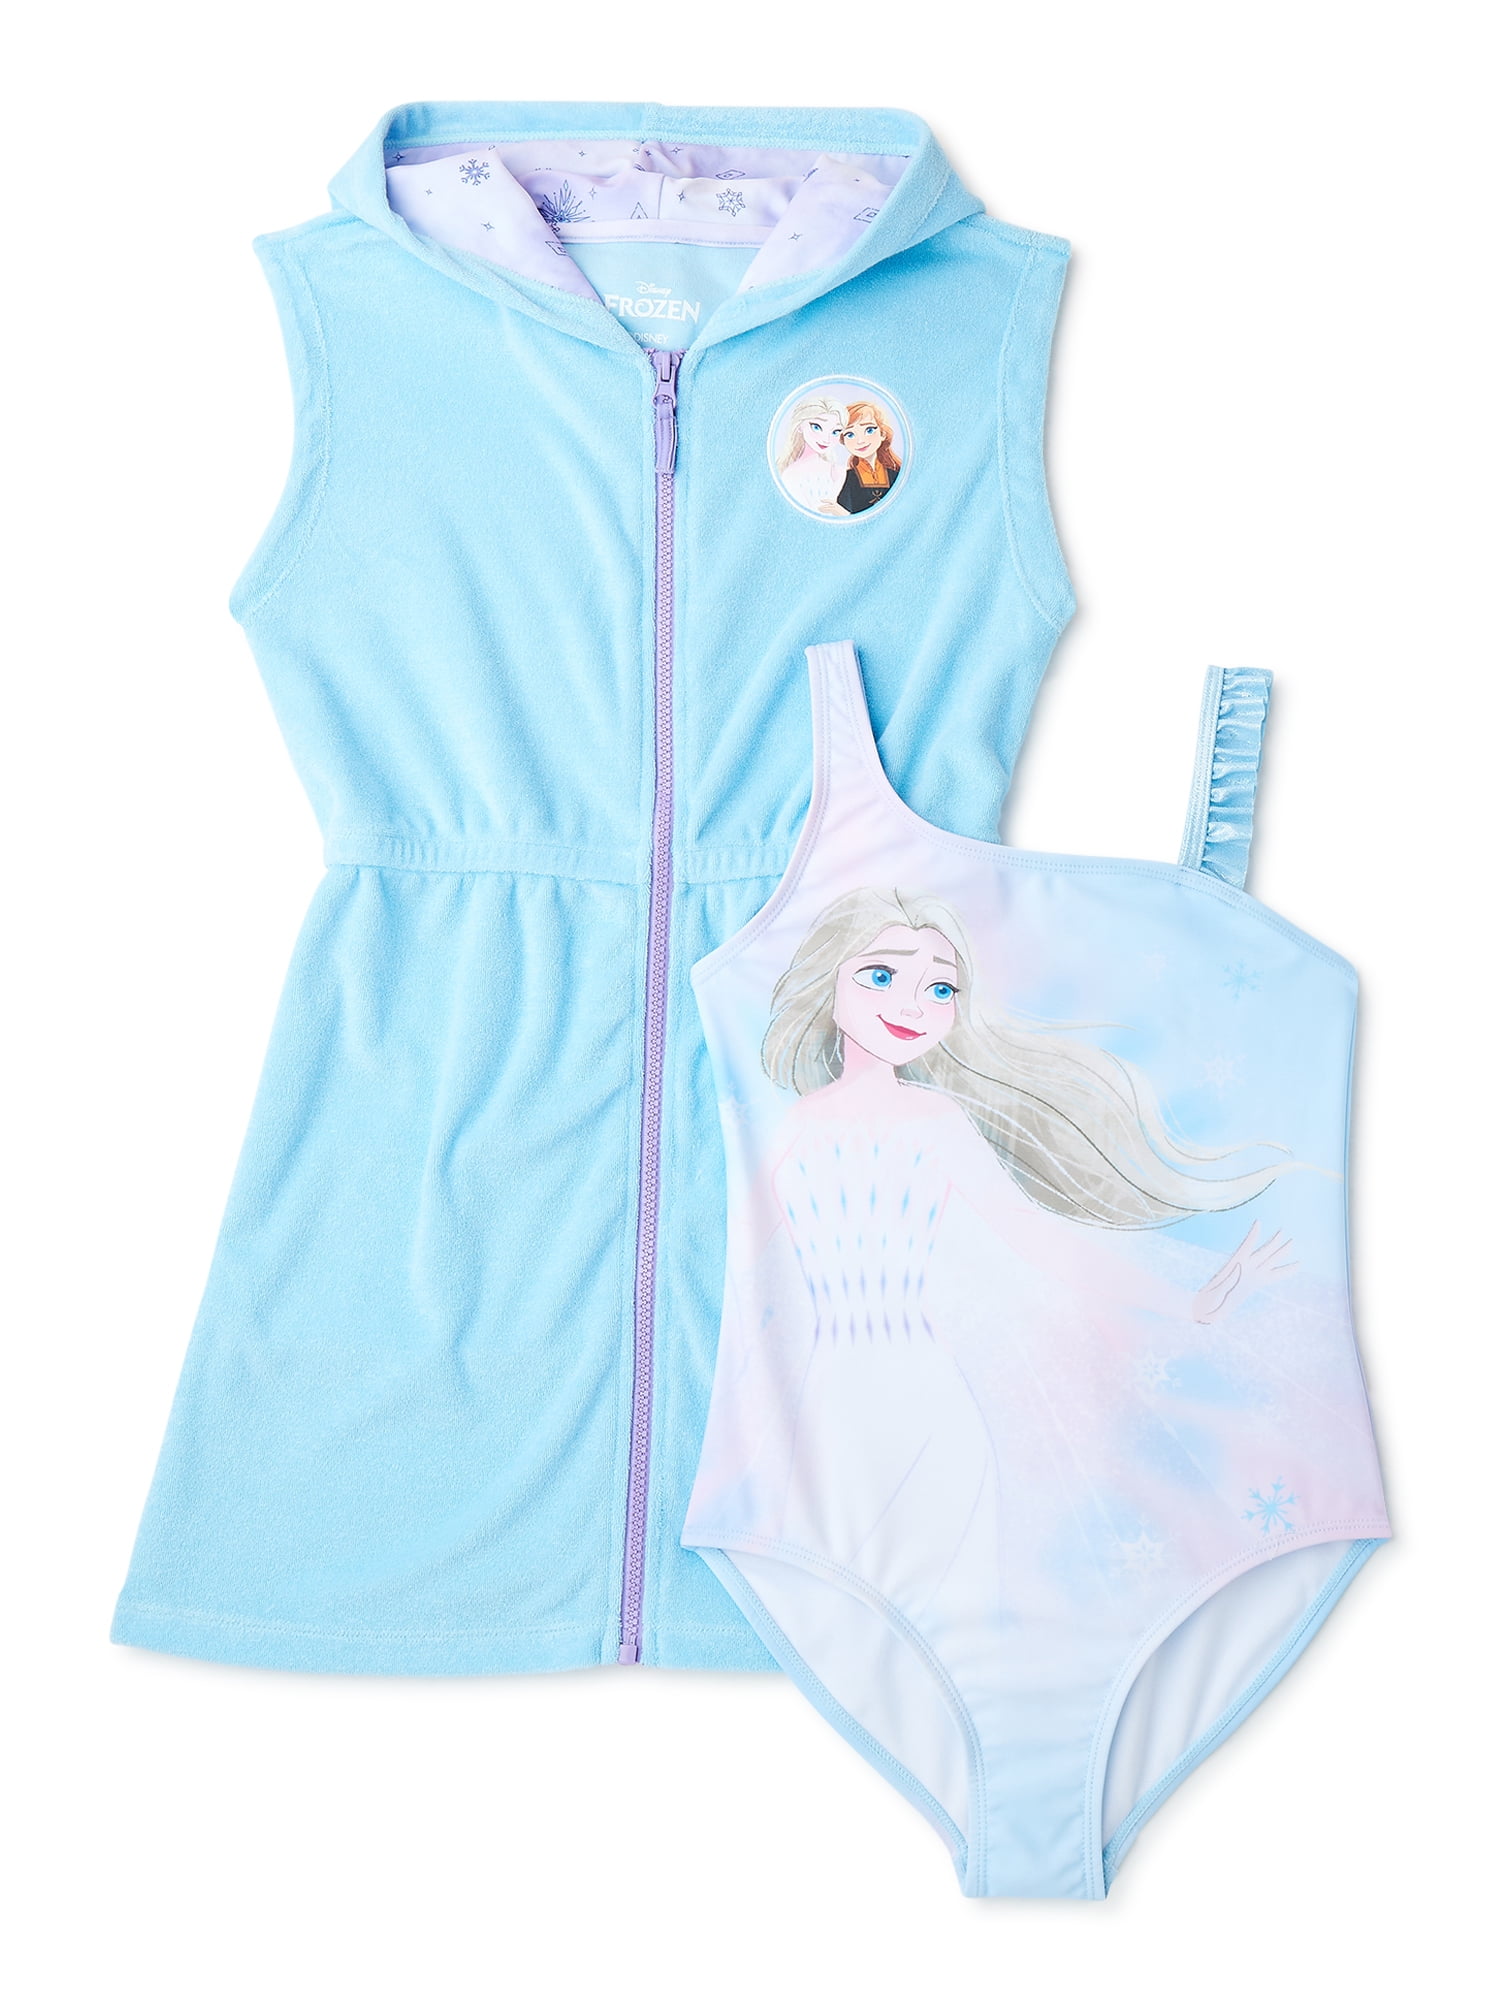 Disney Frozen 2 Official Girls Swimsuits One/Two Piece Swimwear 3-8 Years Elsa & Anna Characters Full Back and Front Patterned